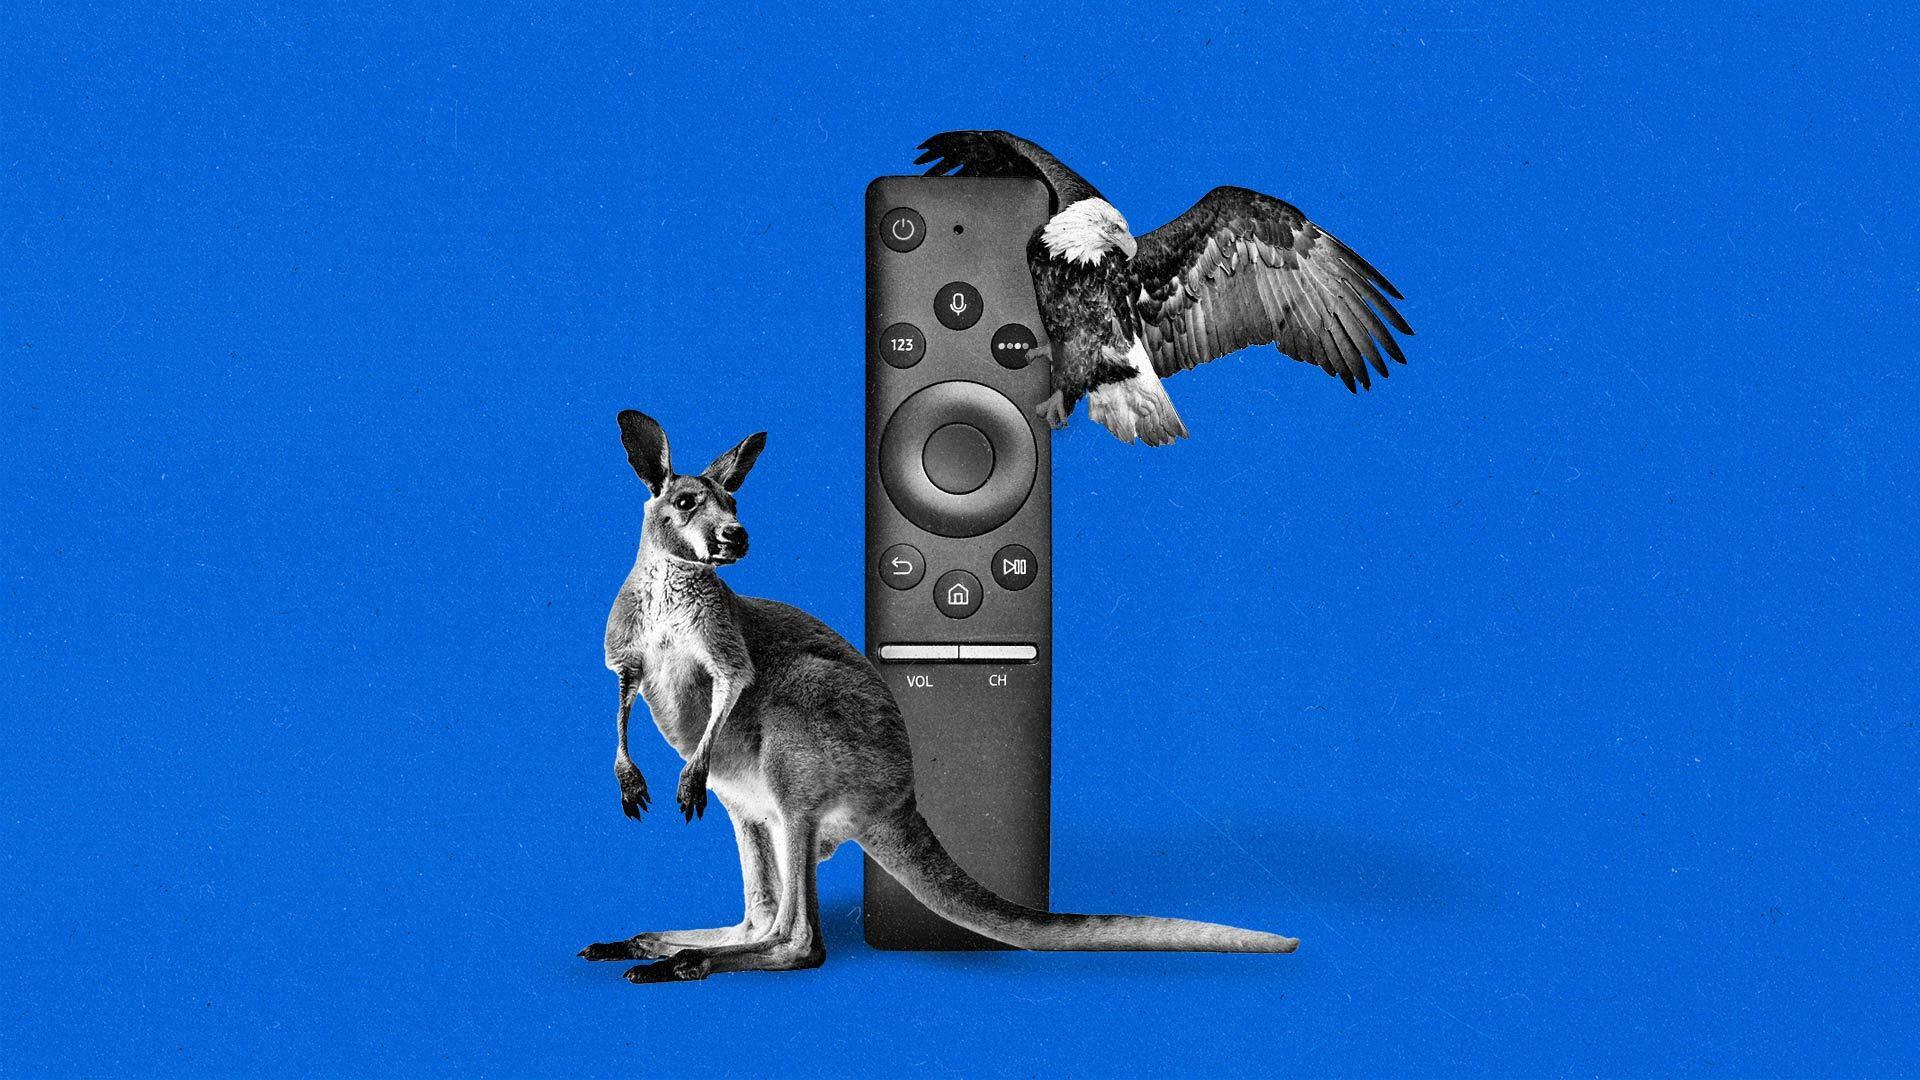 An upright connected TV remote with a kangaroo standing to it's front and left, and a bald eagle perched on its upper right.